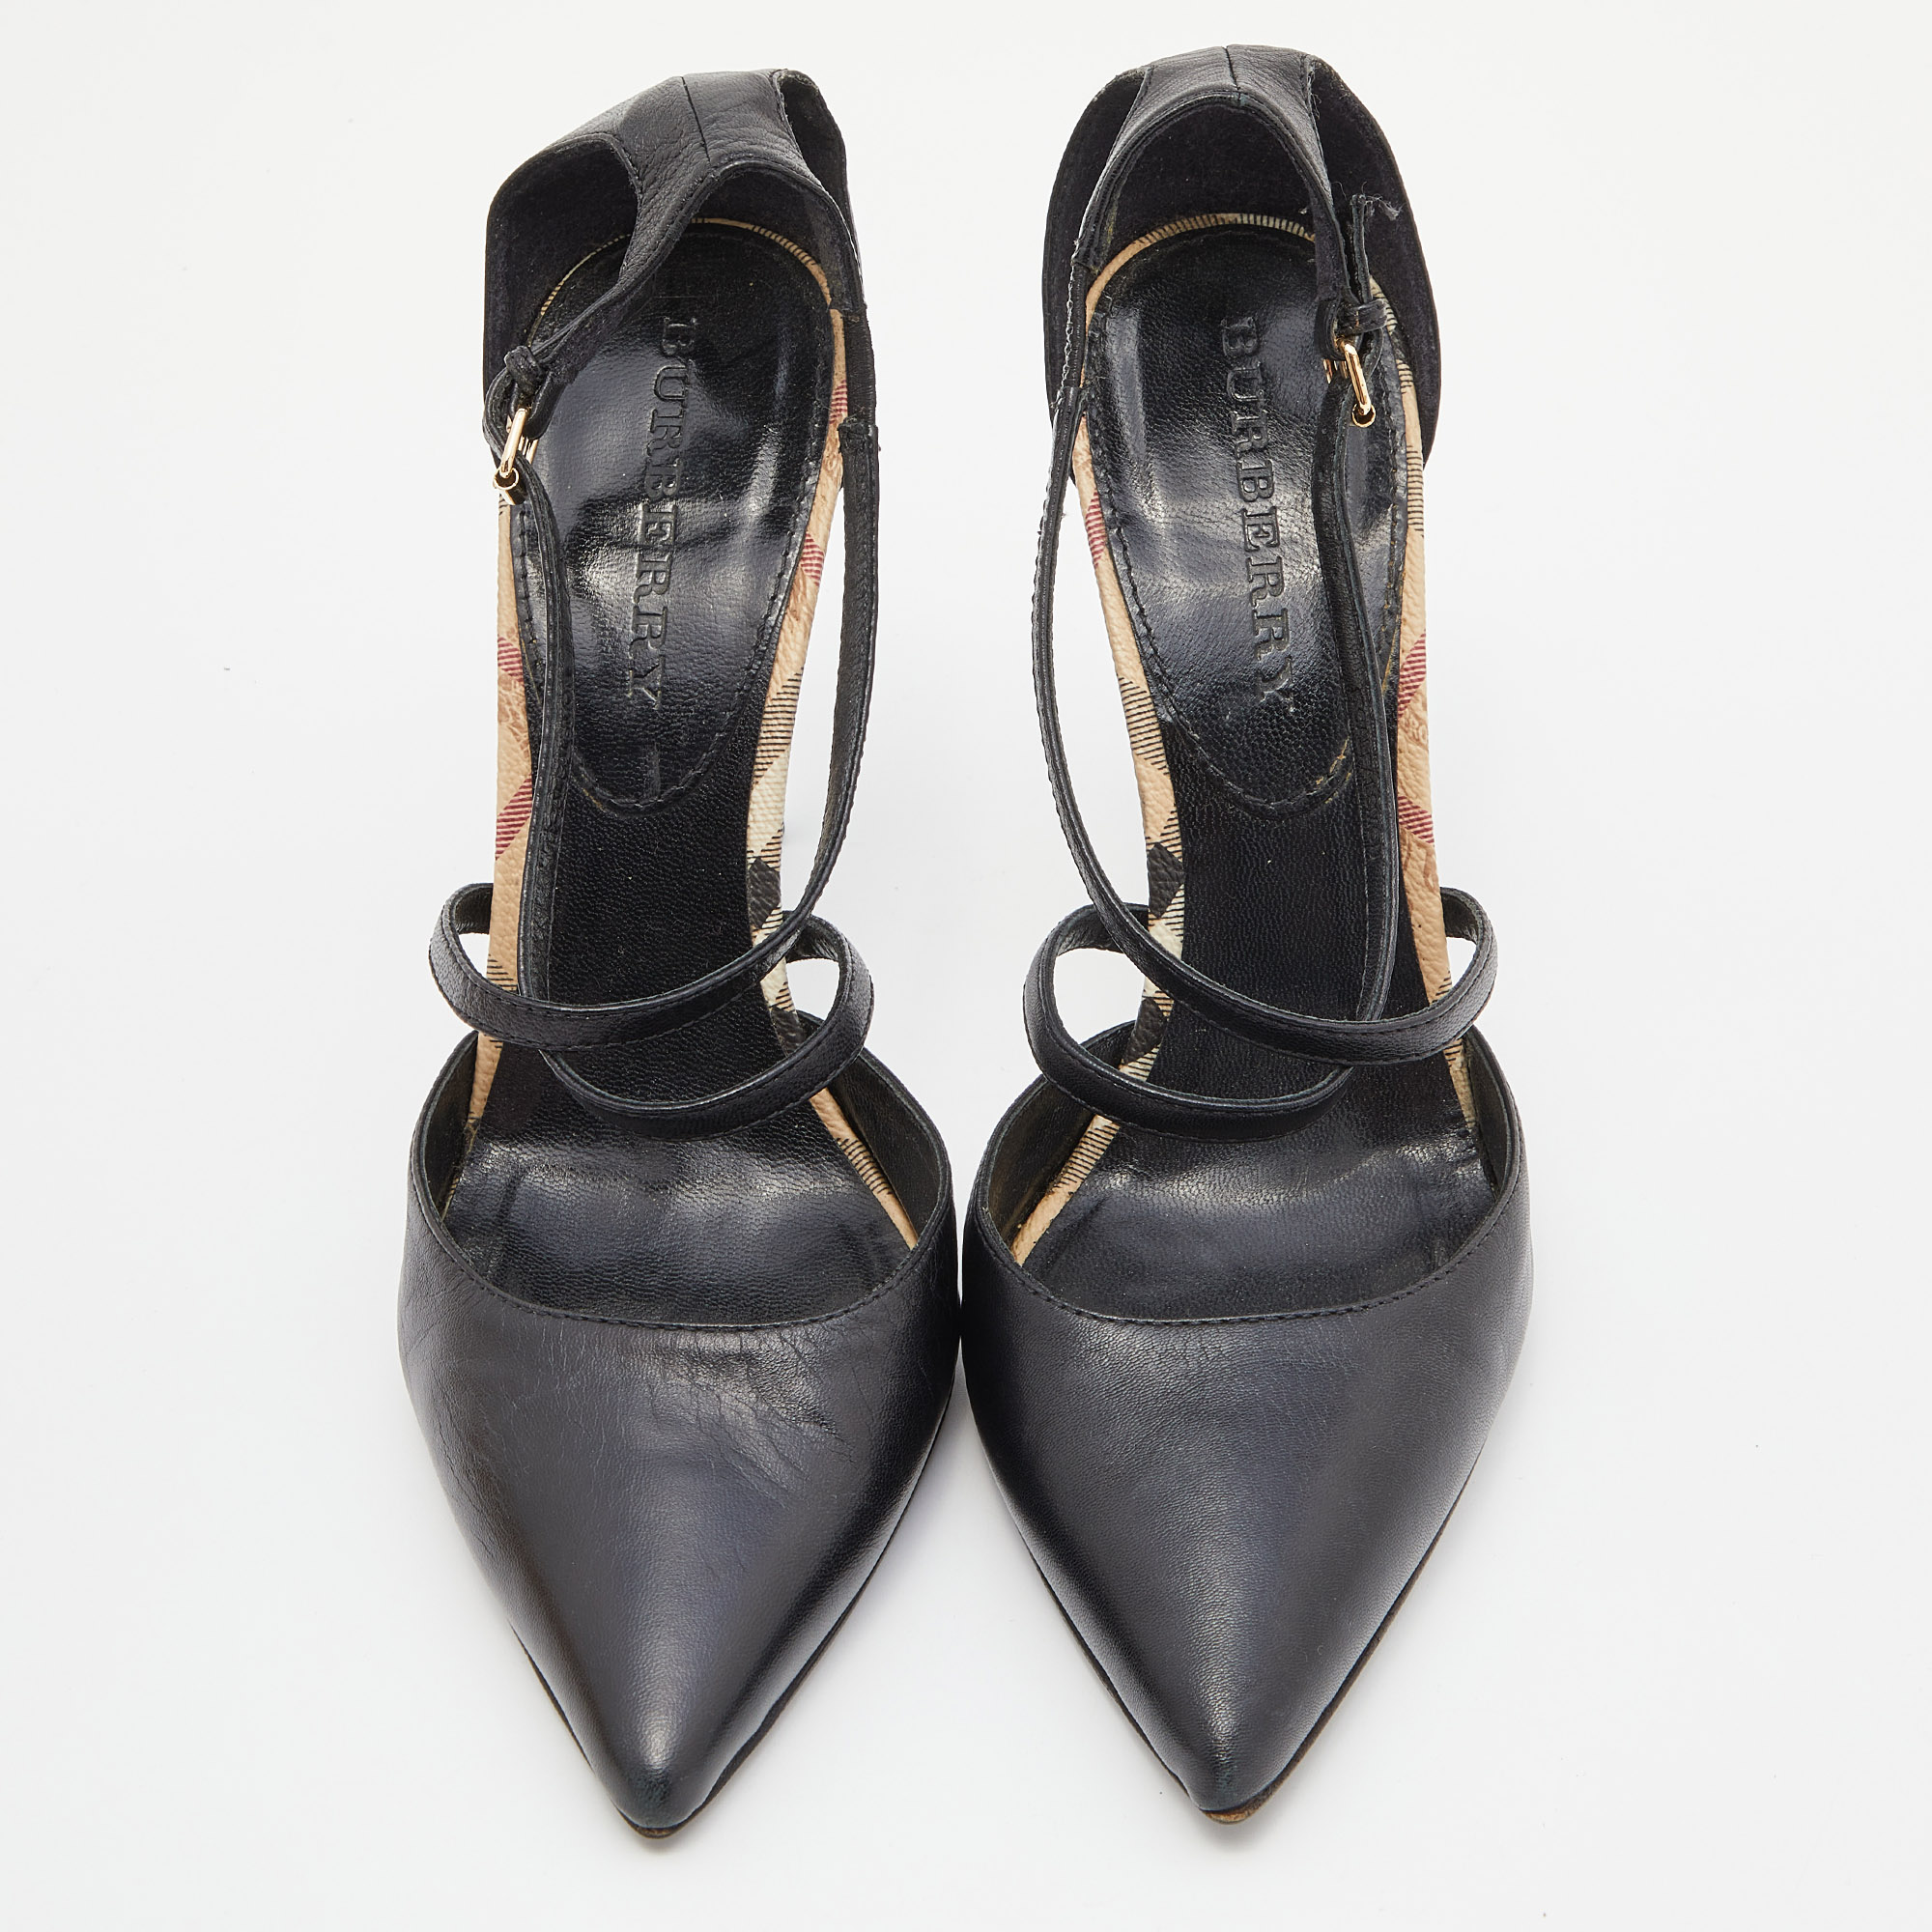 Burberry Black Leather Pointed Toe Ankle Strap Pumps Size 40